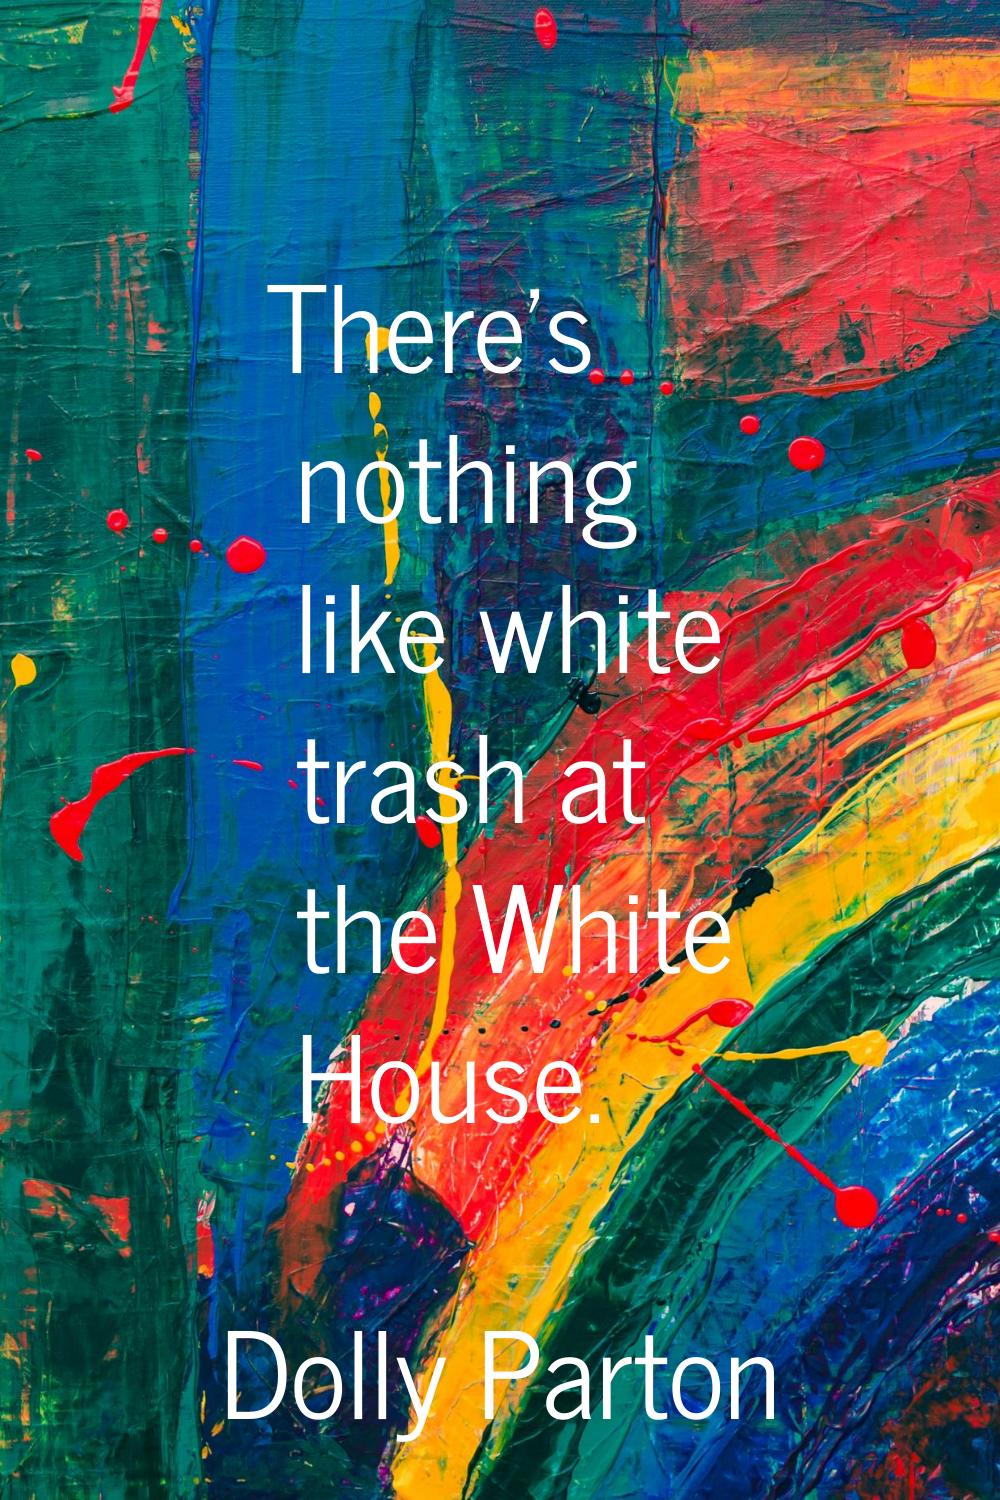 There's nothing like white trash at the White House.